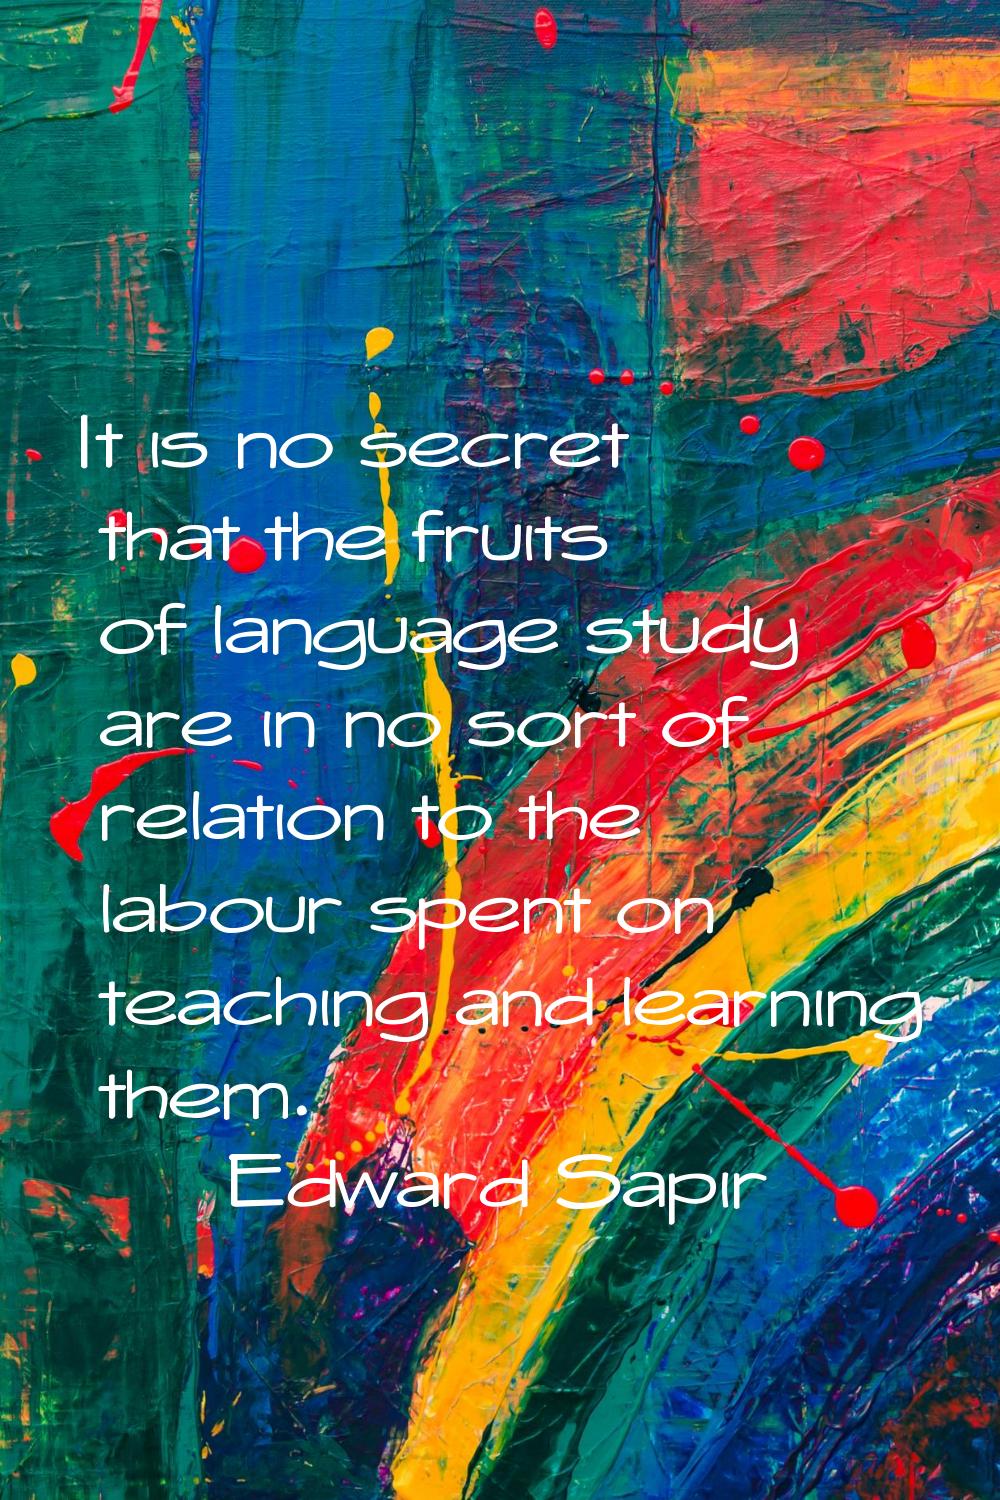 It is no secret that the fruits of language study are in no sort of relation to the labour spent on